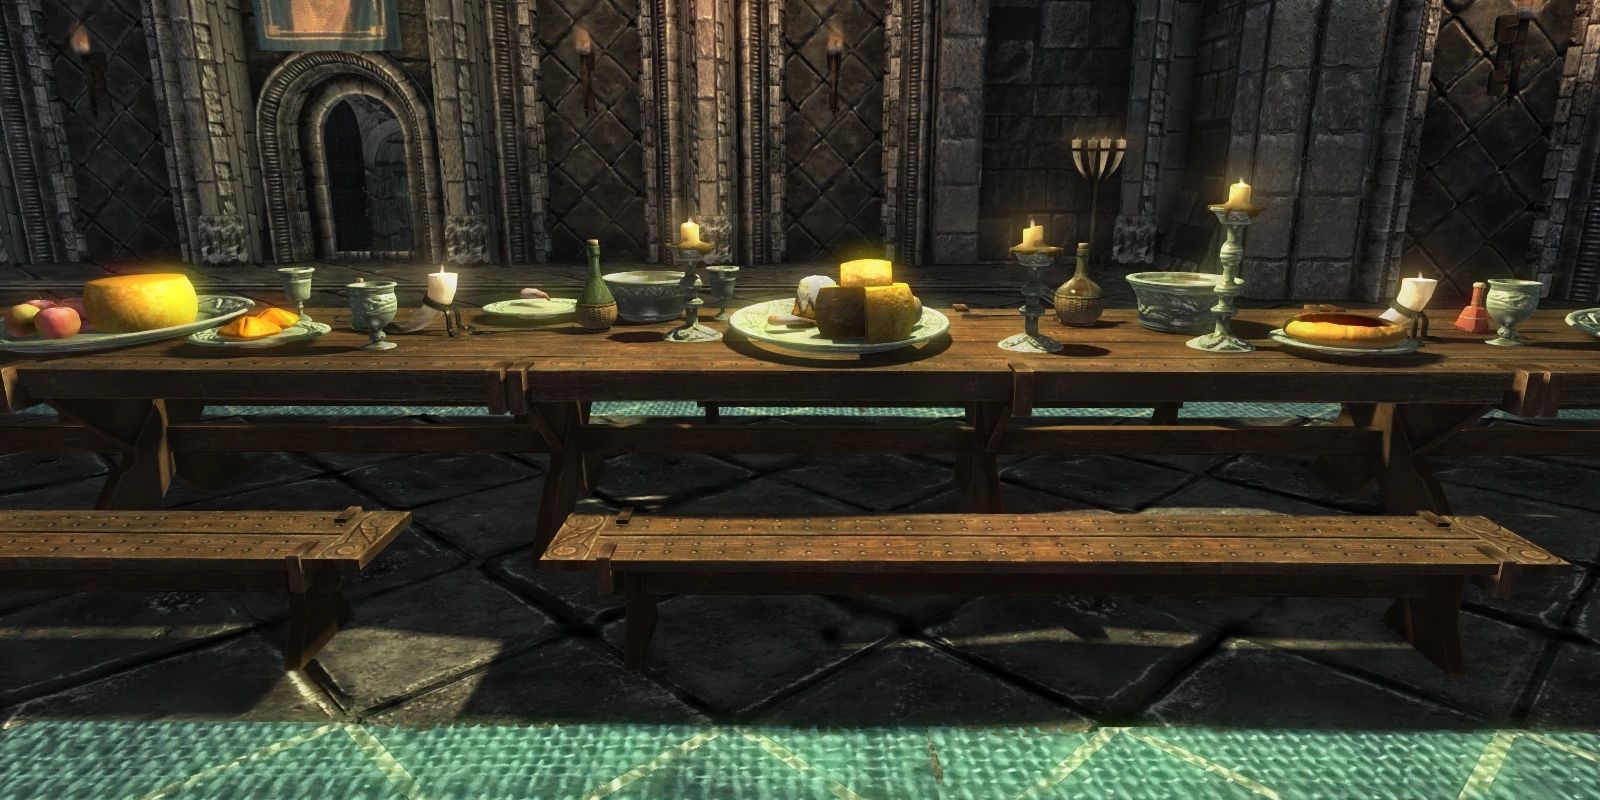 A dining table with plates of food and goblets on it